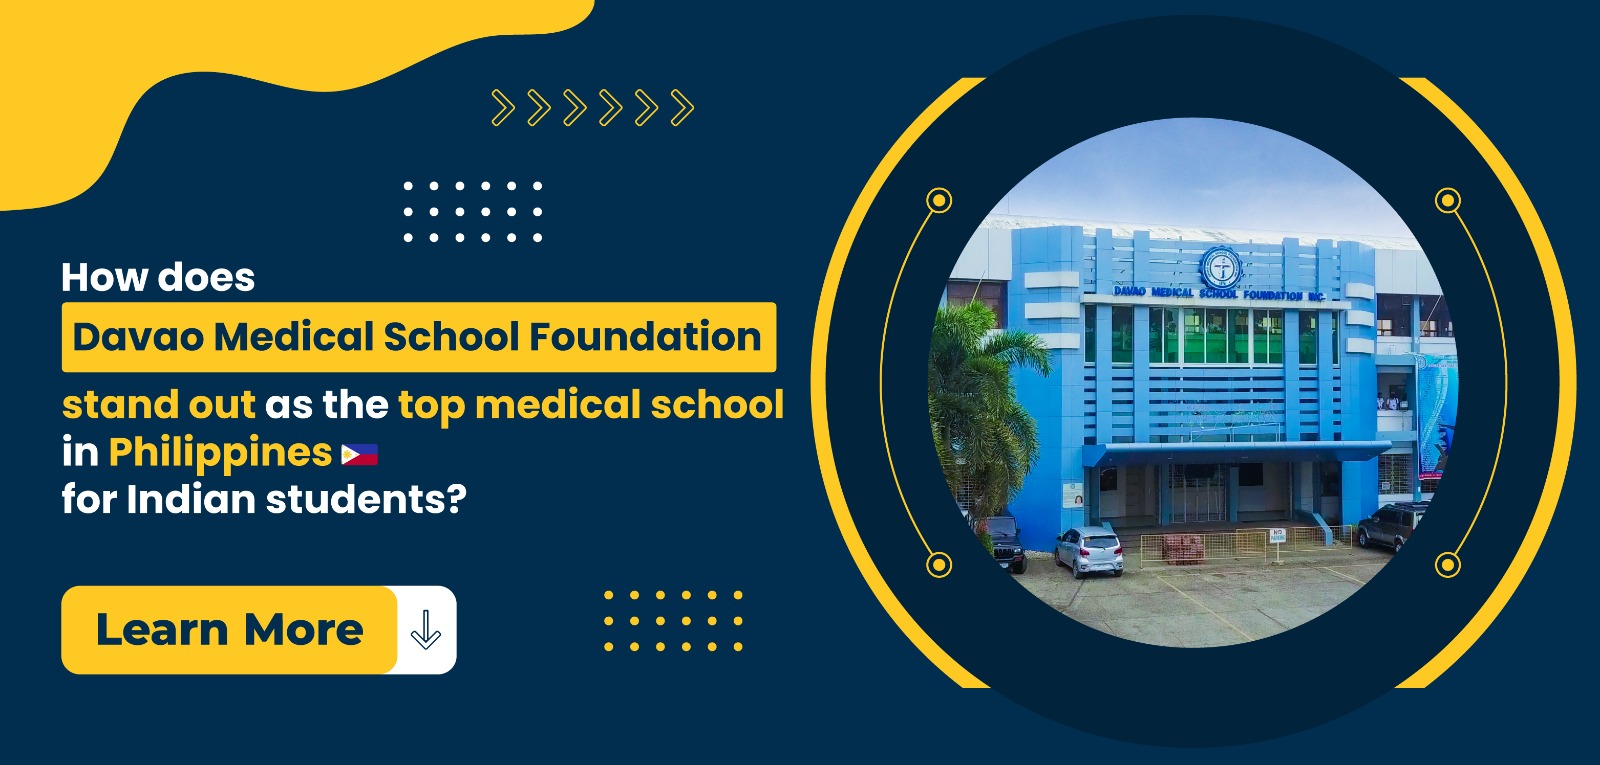 How does Davao Medical School Foundation stand out as the top medical school in Philippines for Indian students?